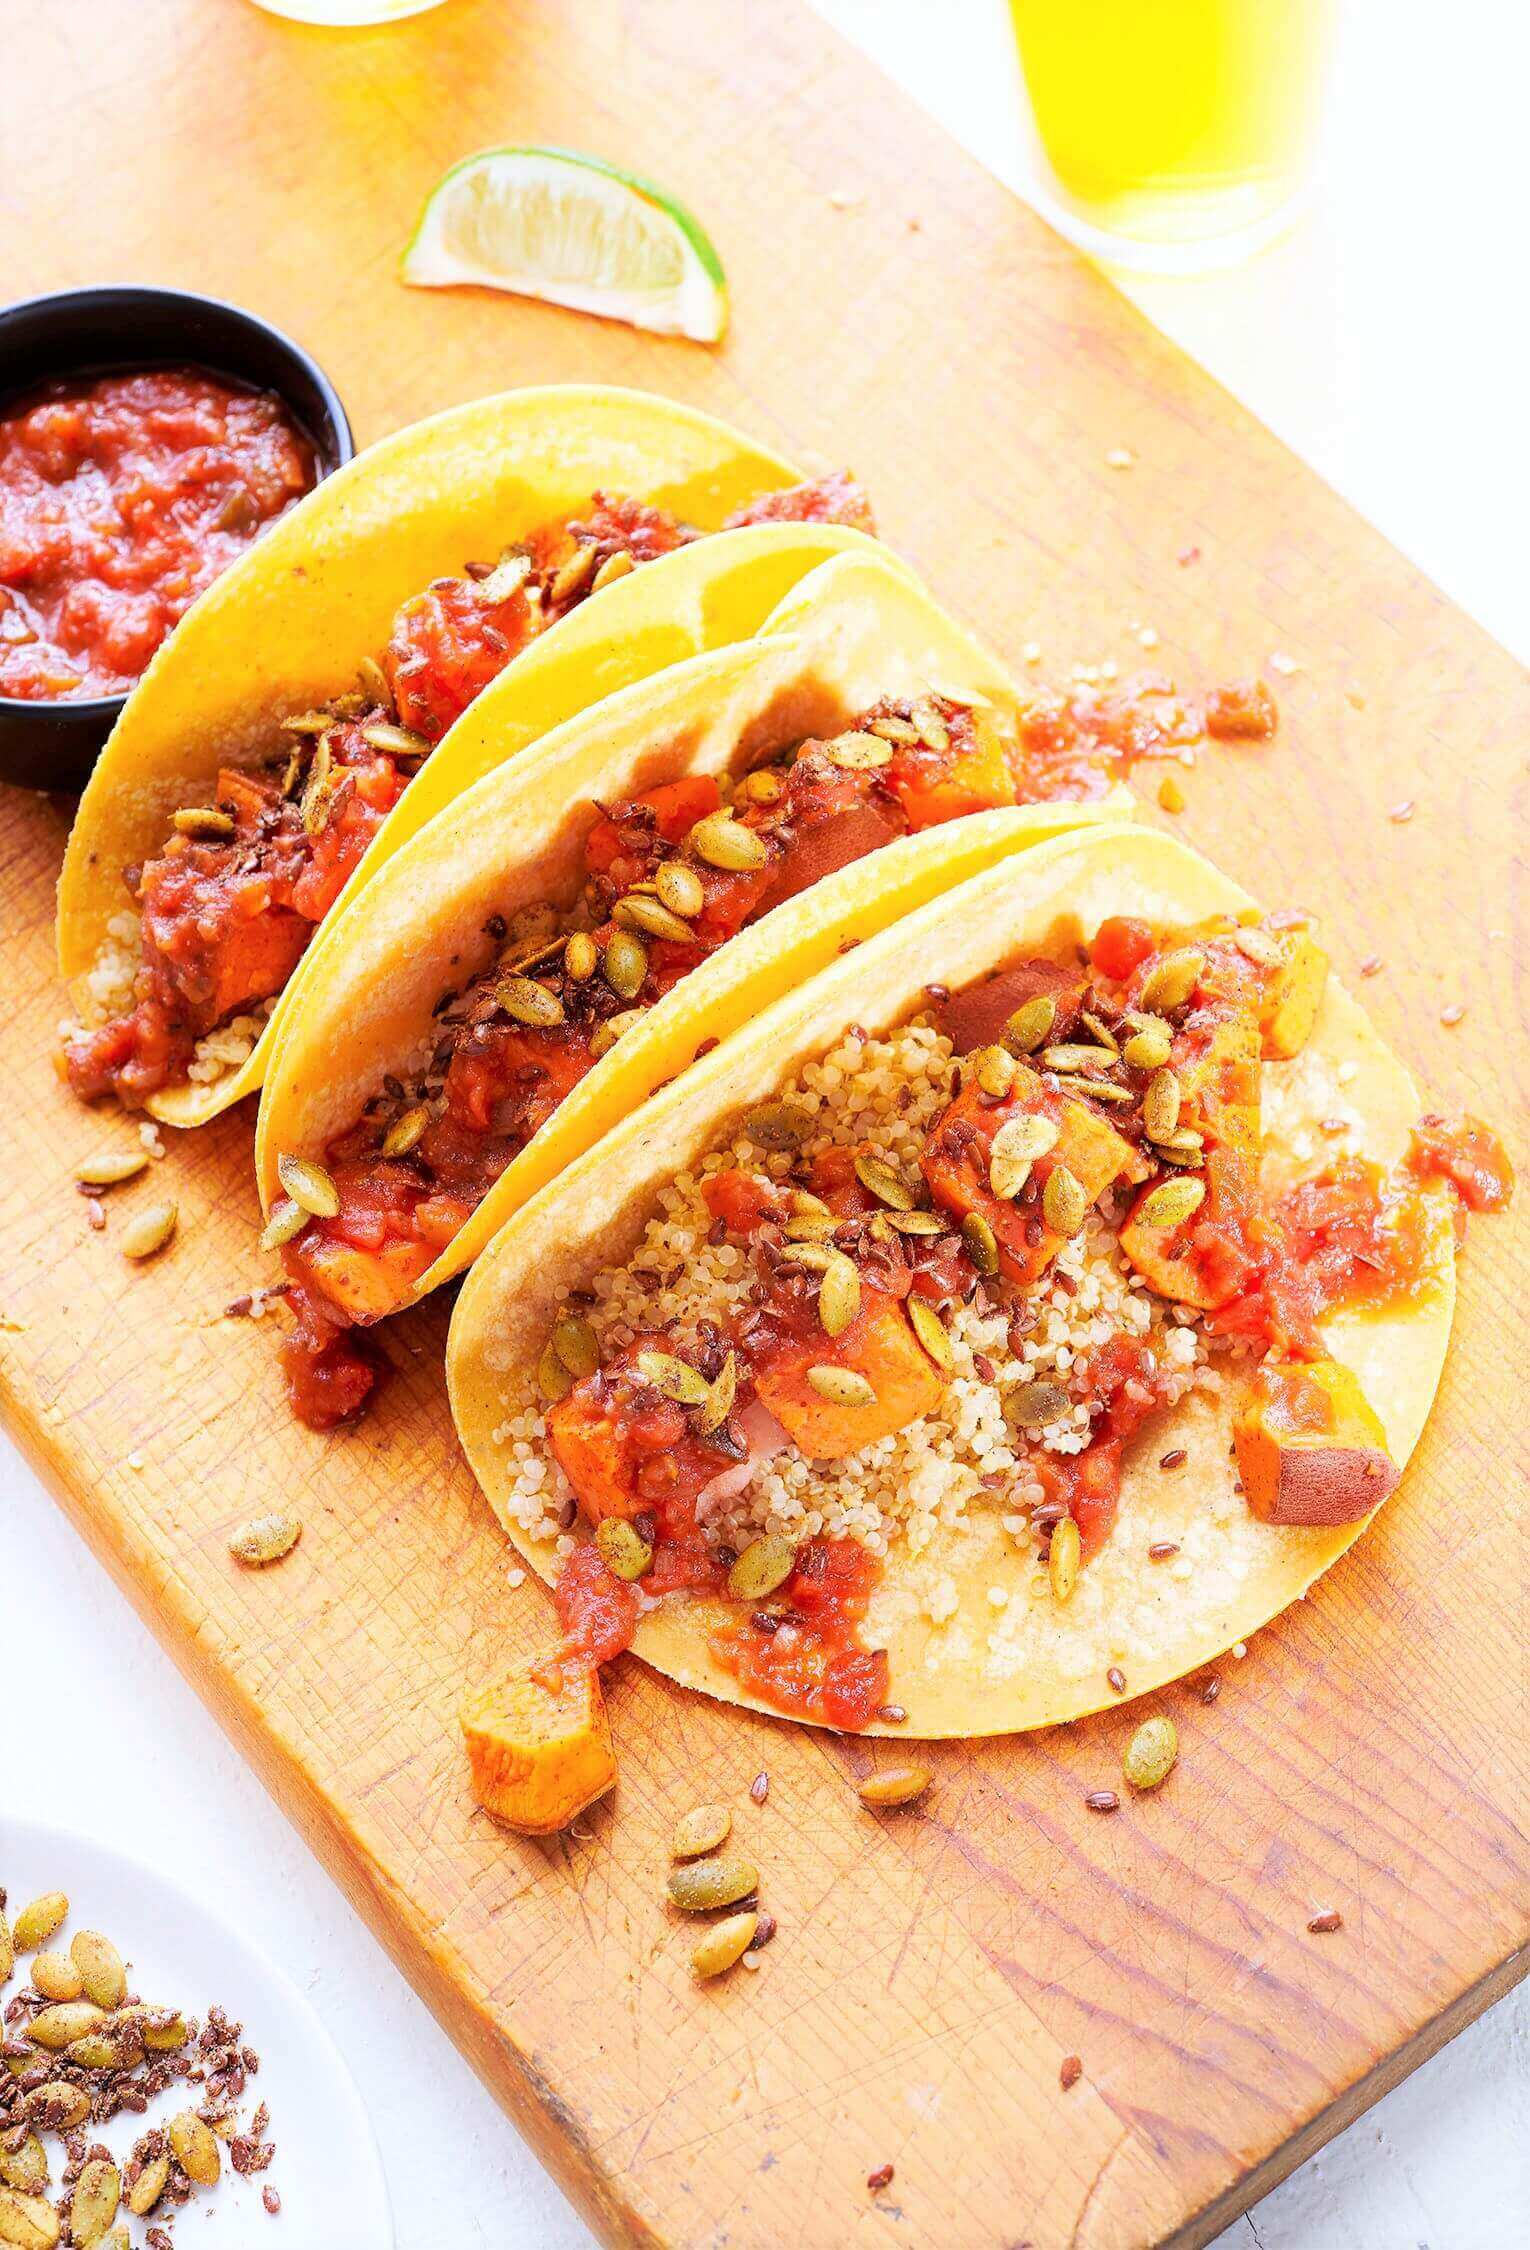 Smoked Sweet Potato Tacos with Red Pepper Salsa and Lime Crema